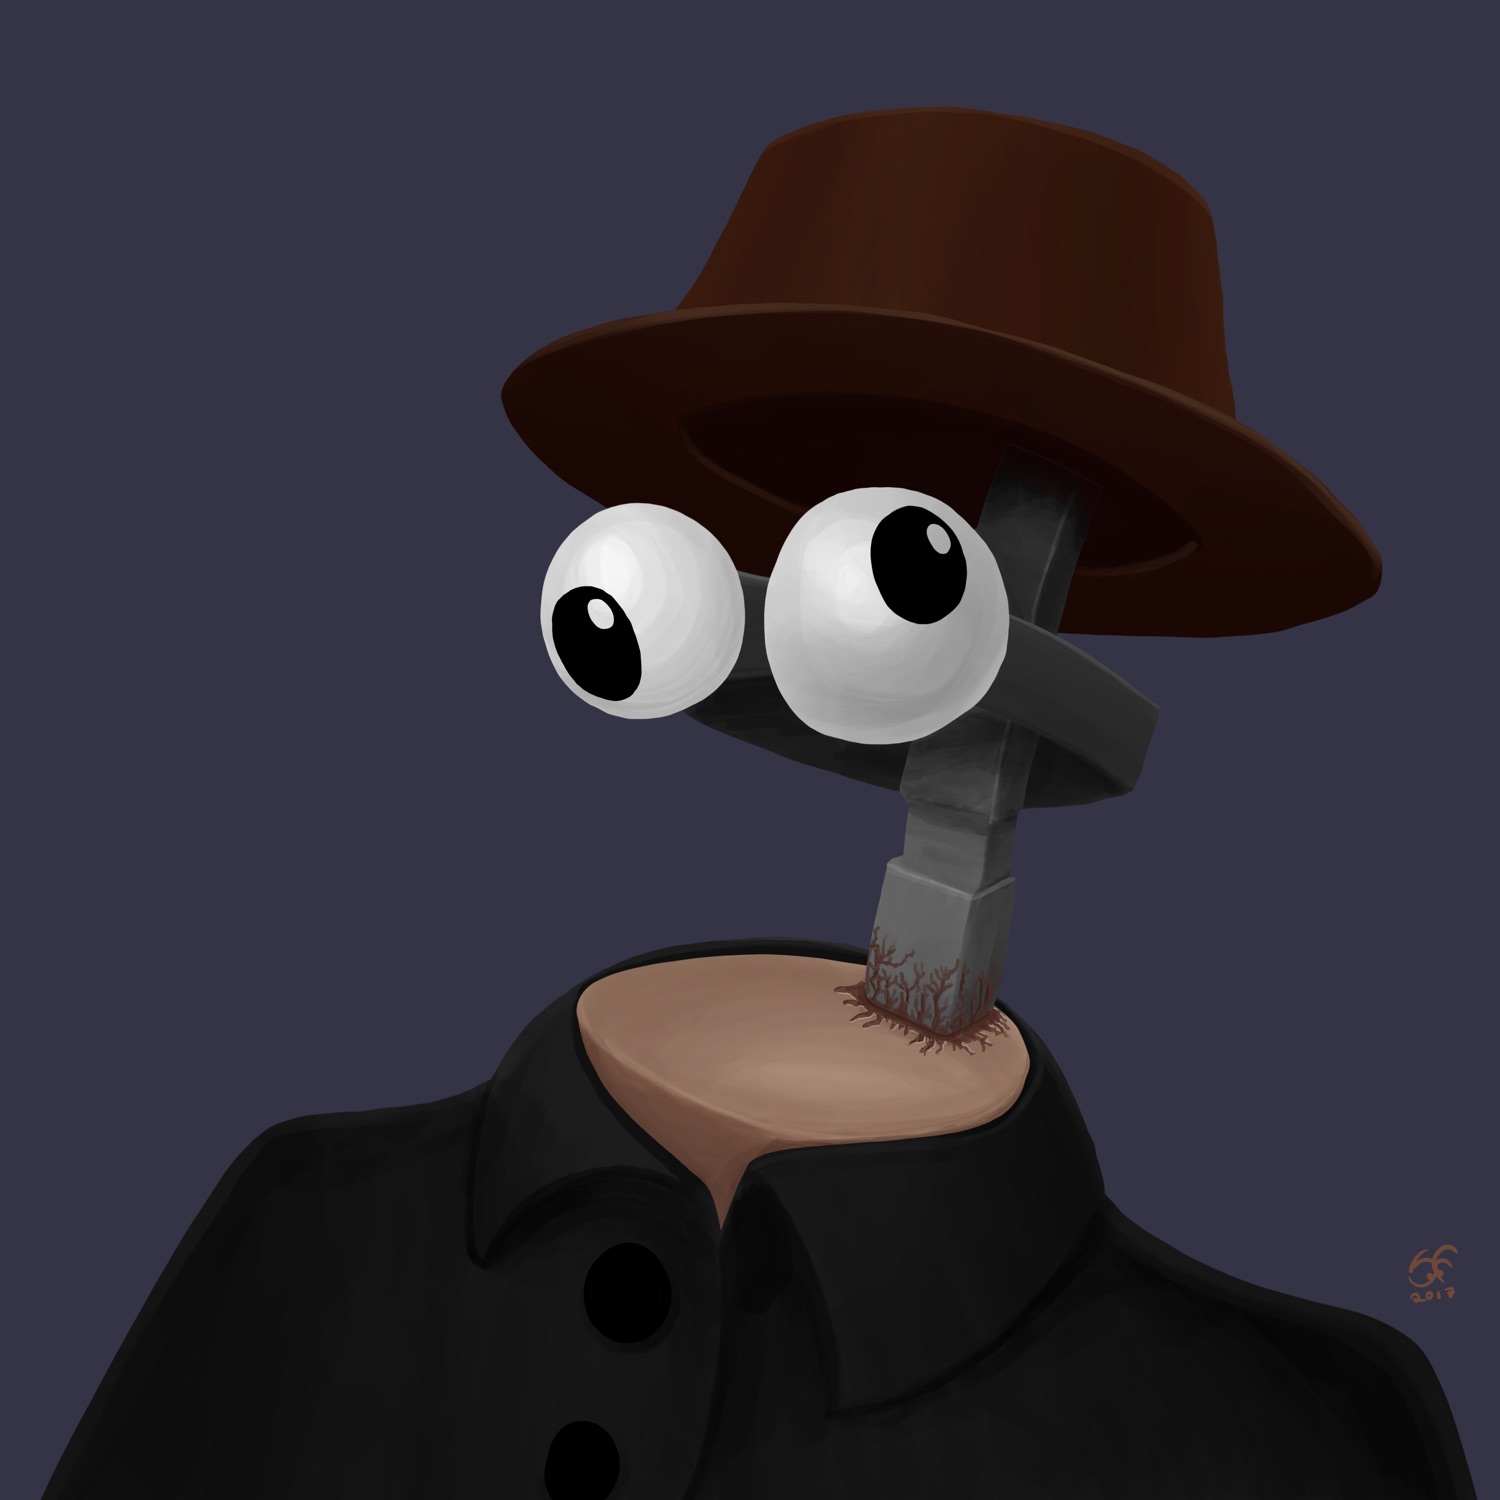 An illustration of a thing in a trench coat and hat with no head, only a pair of googly eyes